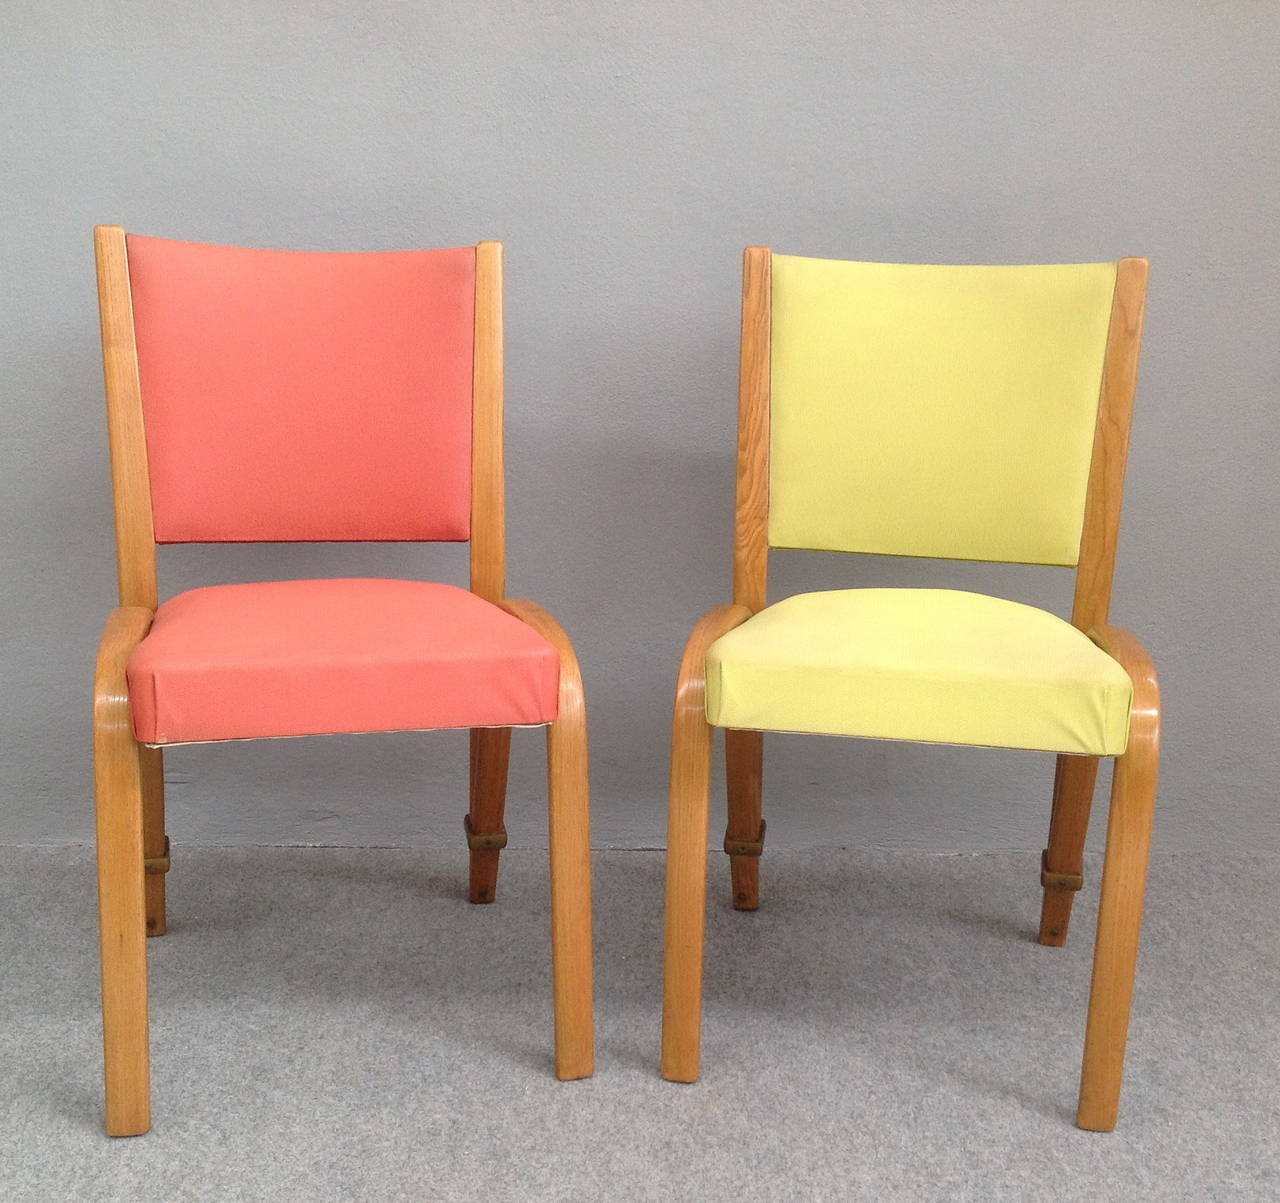 Pair of Bow Wood Chairs by Steiner 1